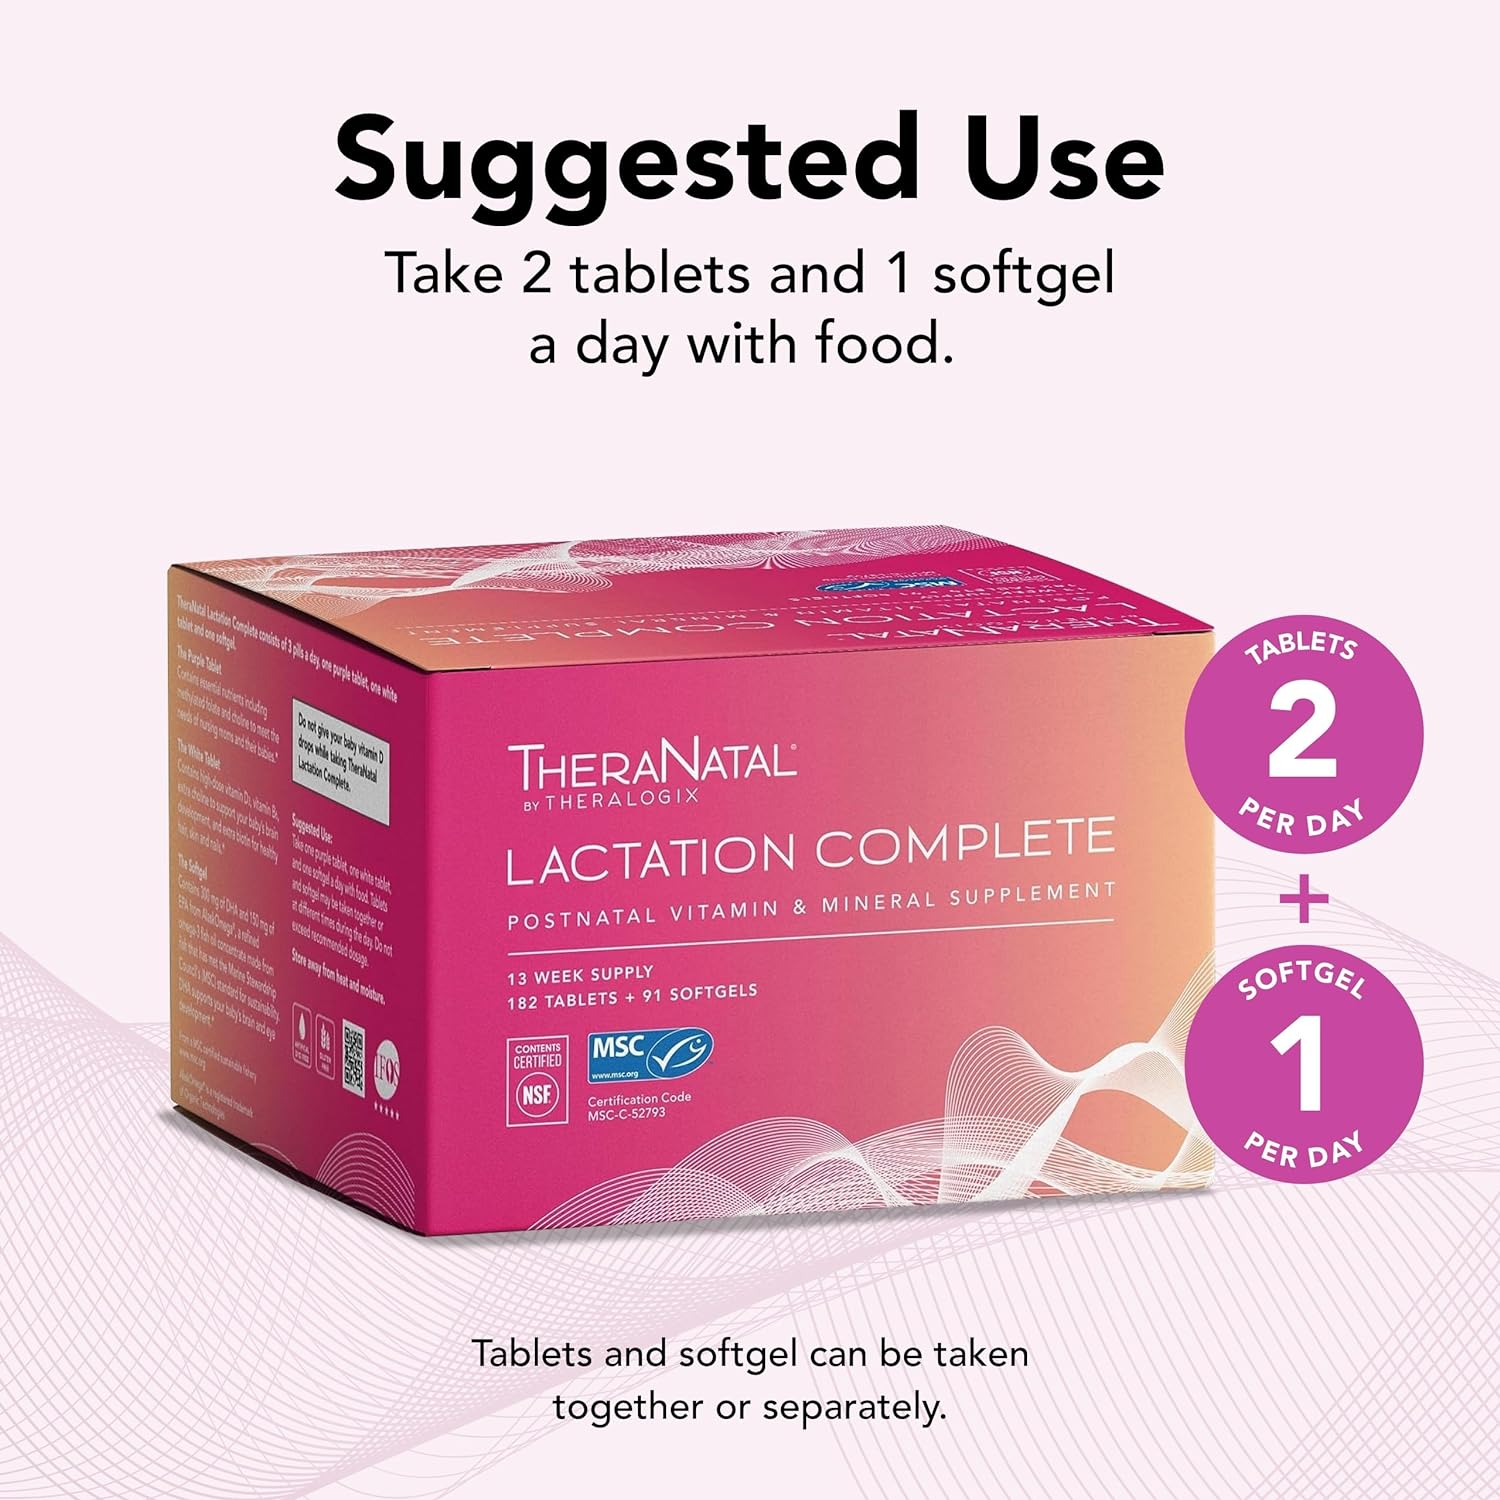 Theralogix TheraNatal Lactation Complete Postnatal Vitamin Supplement - 13-Week Supply - Breastfeeding Supplement for Women - NSF Certified - 182 Tablets & 91 Softgels : Health & Household